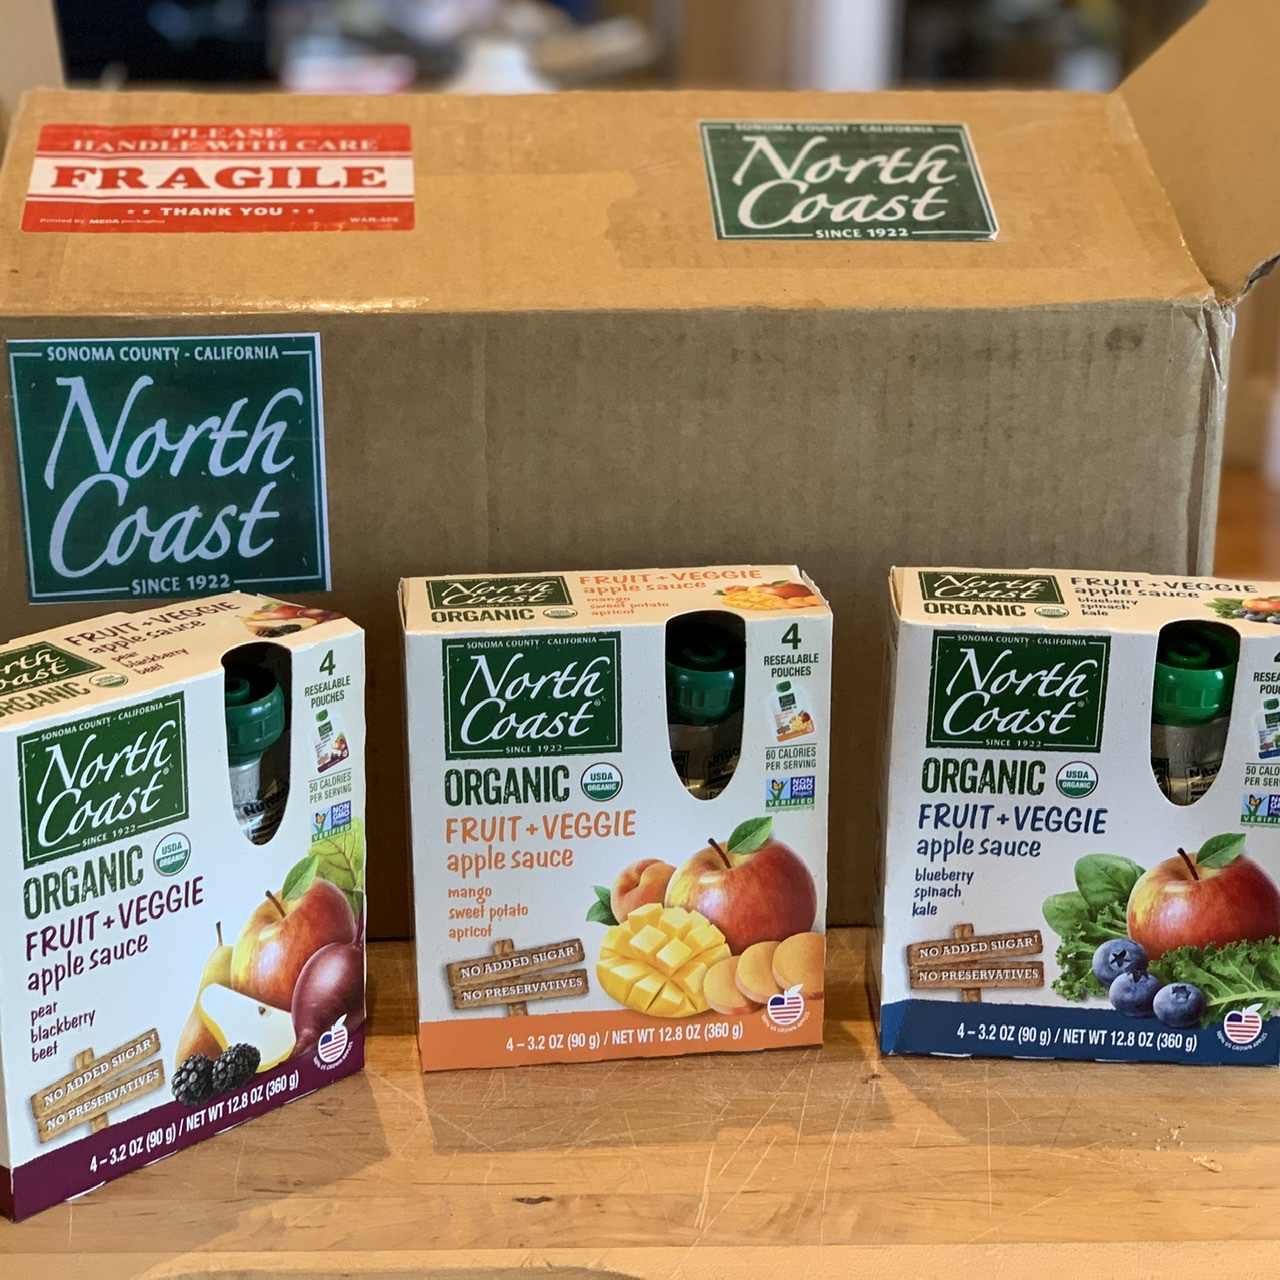 Applesauce pouches from North Coast Organics